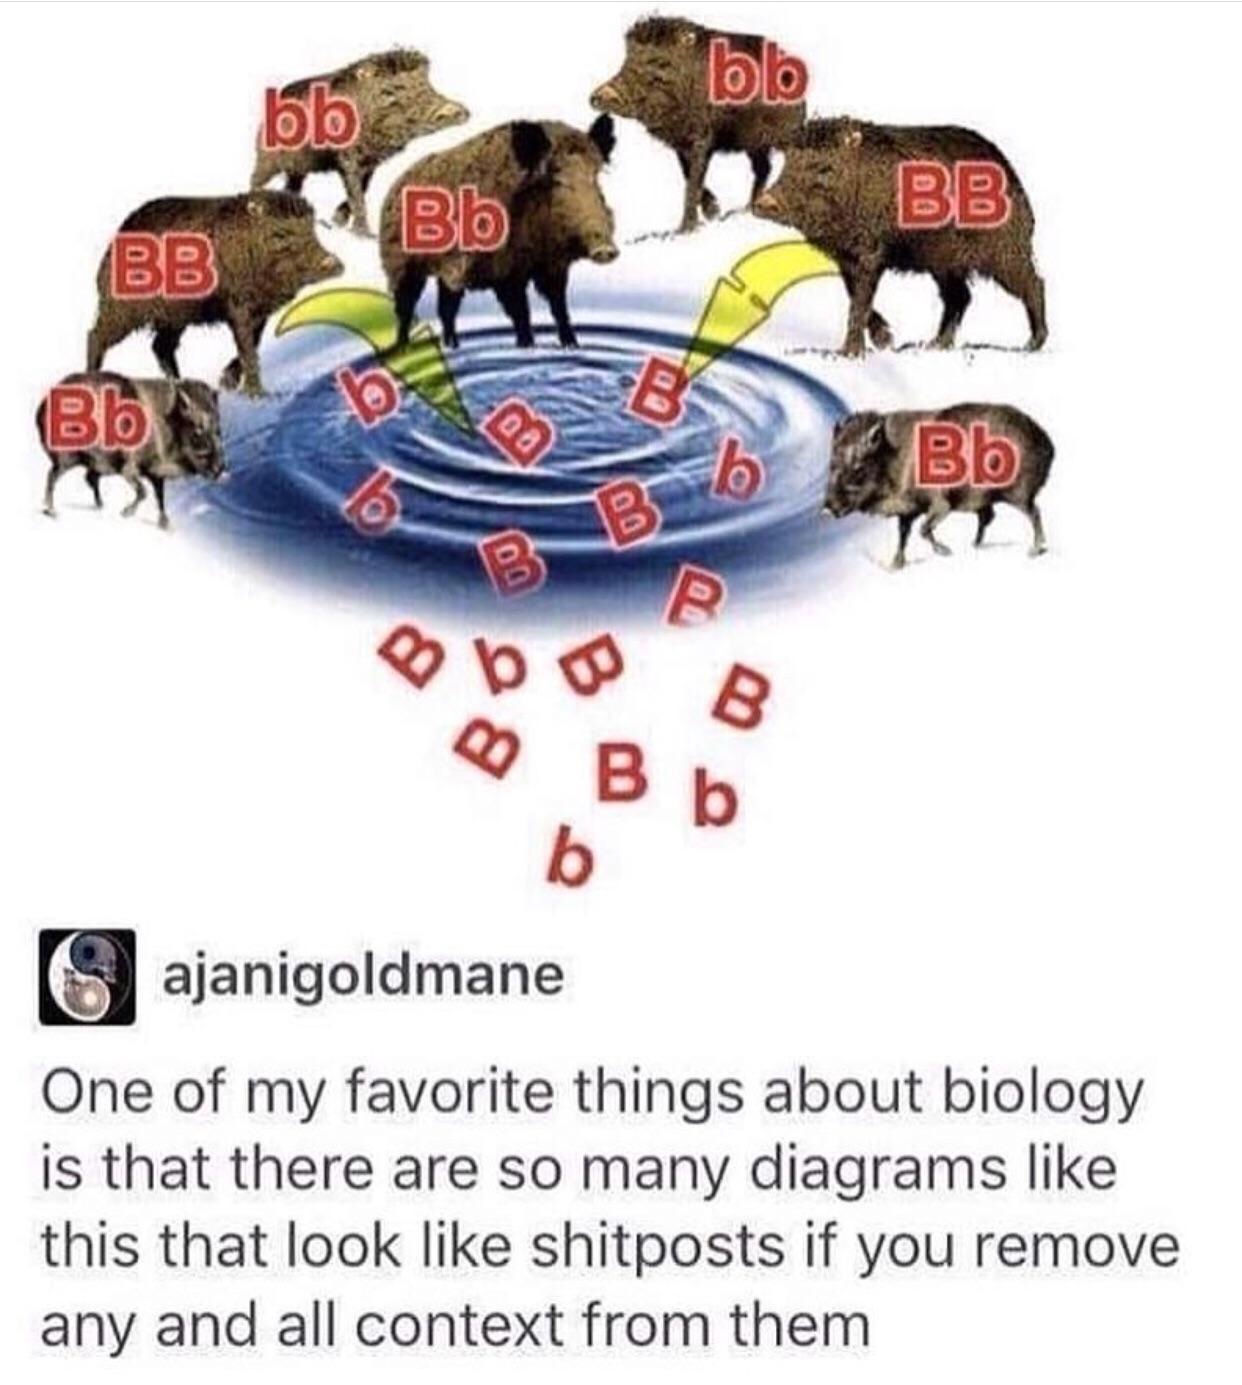 memes - enter the boartex - bb bb Bb Bb Bb Bb bo ajanigoldmane One of my favorite things about biology is that there are so many diagrams this that look shitposts if you remove any and all context from them